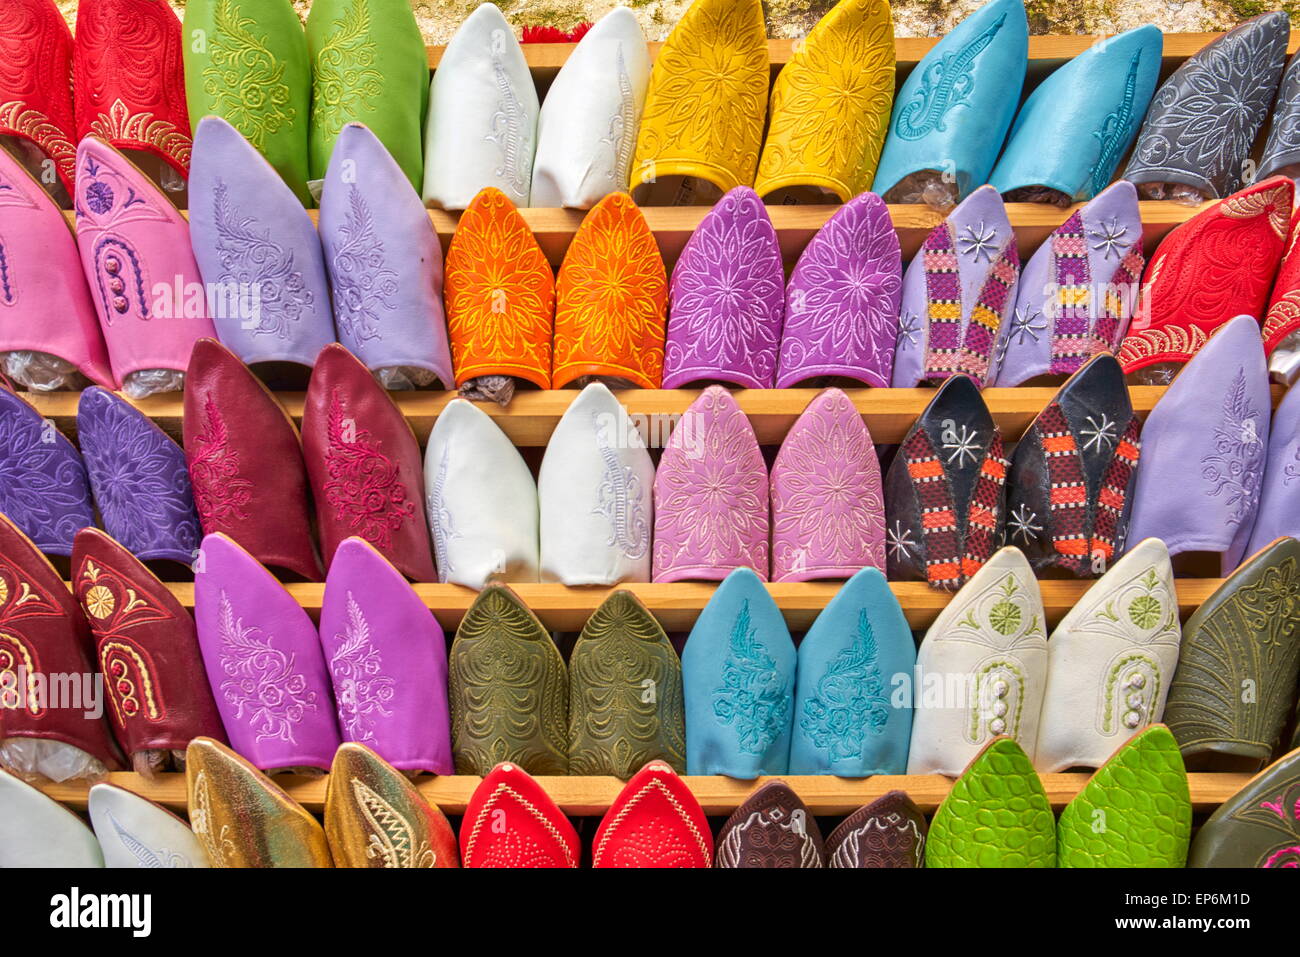 Shoe store. Babouches, brightly coloured traditional Moroccan slippers. Morocco Stock Photo